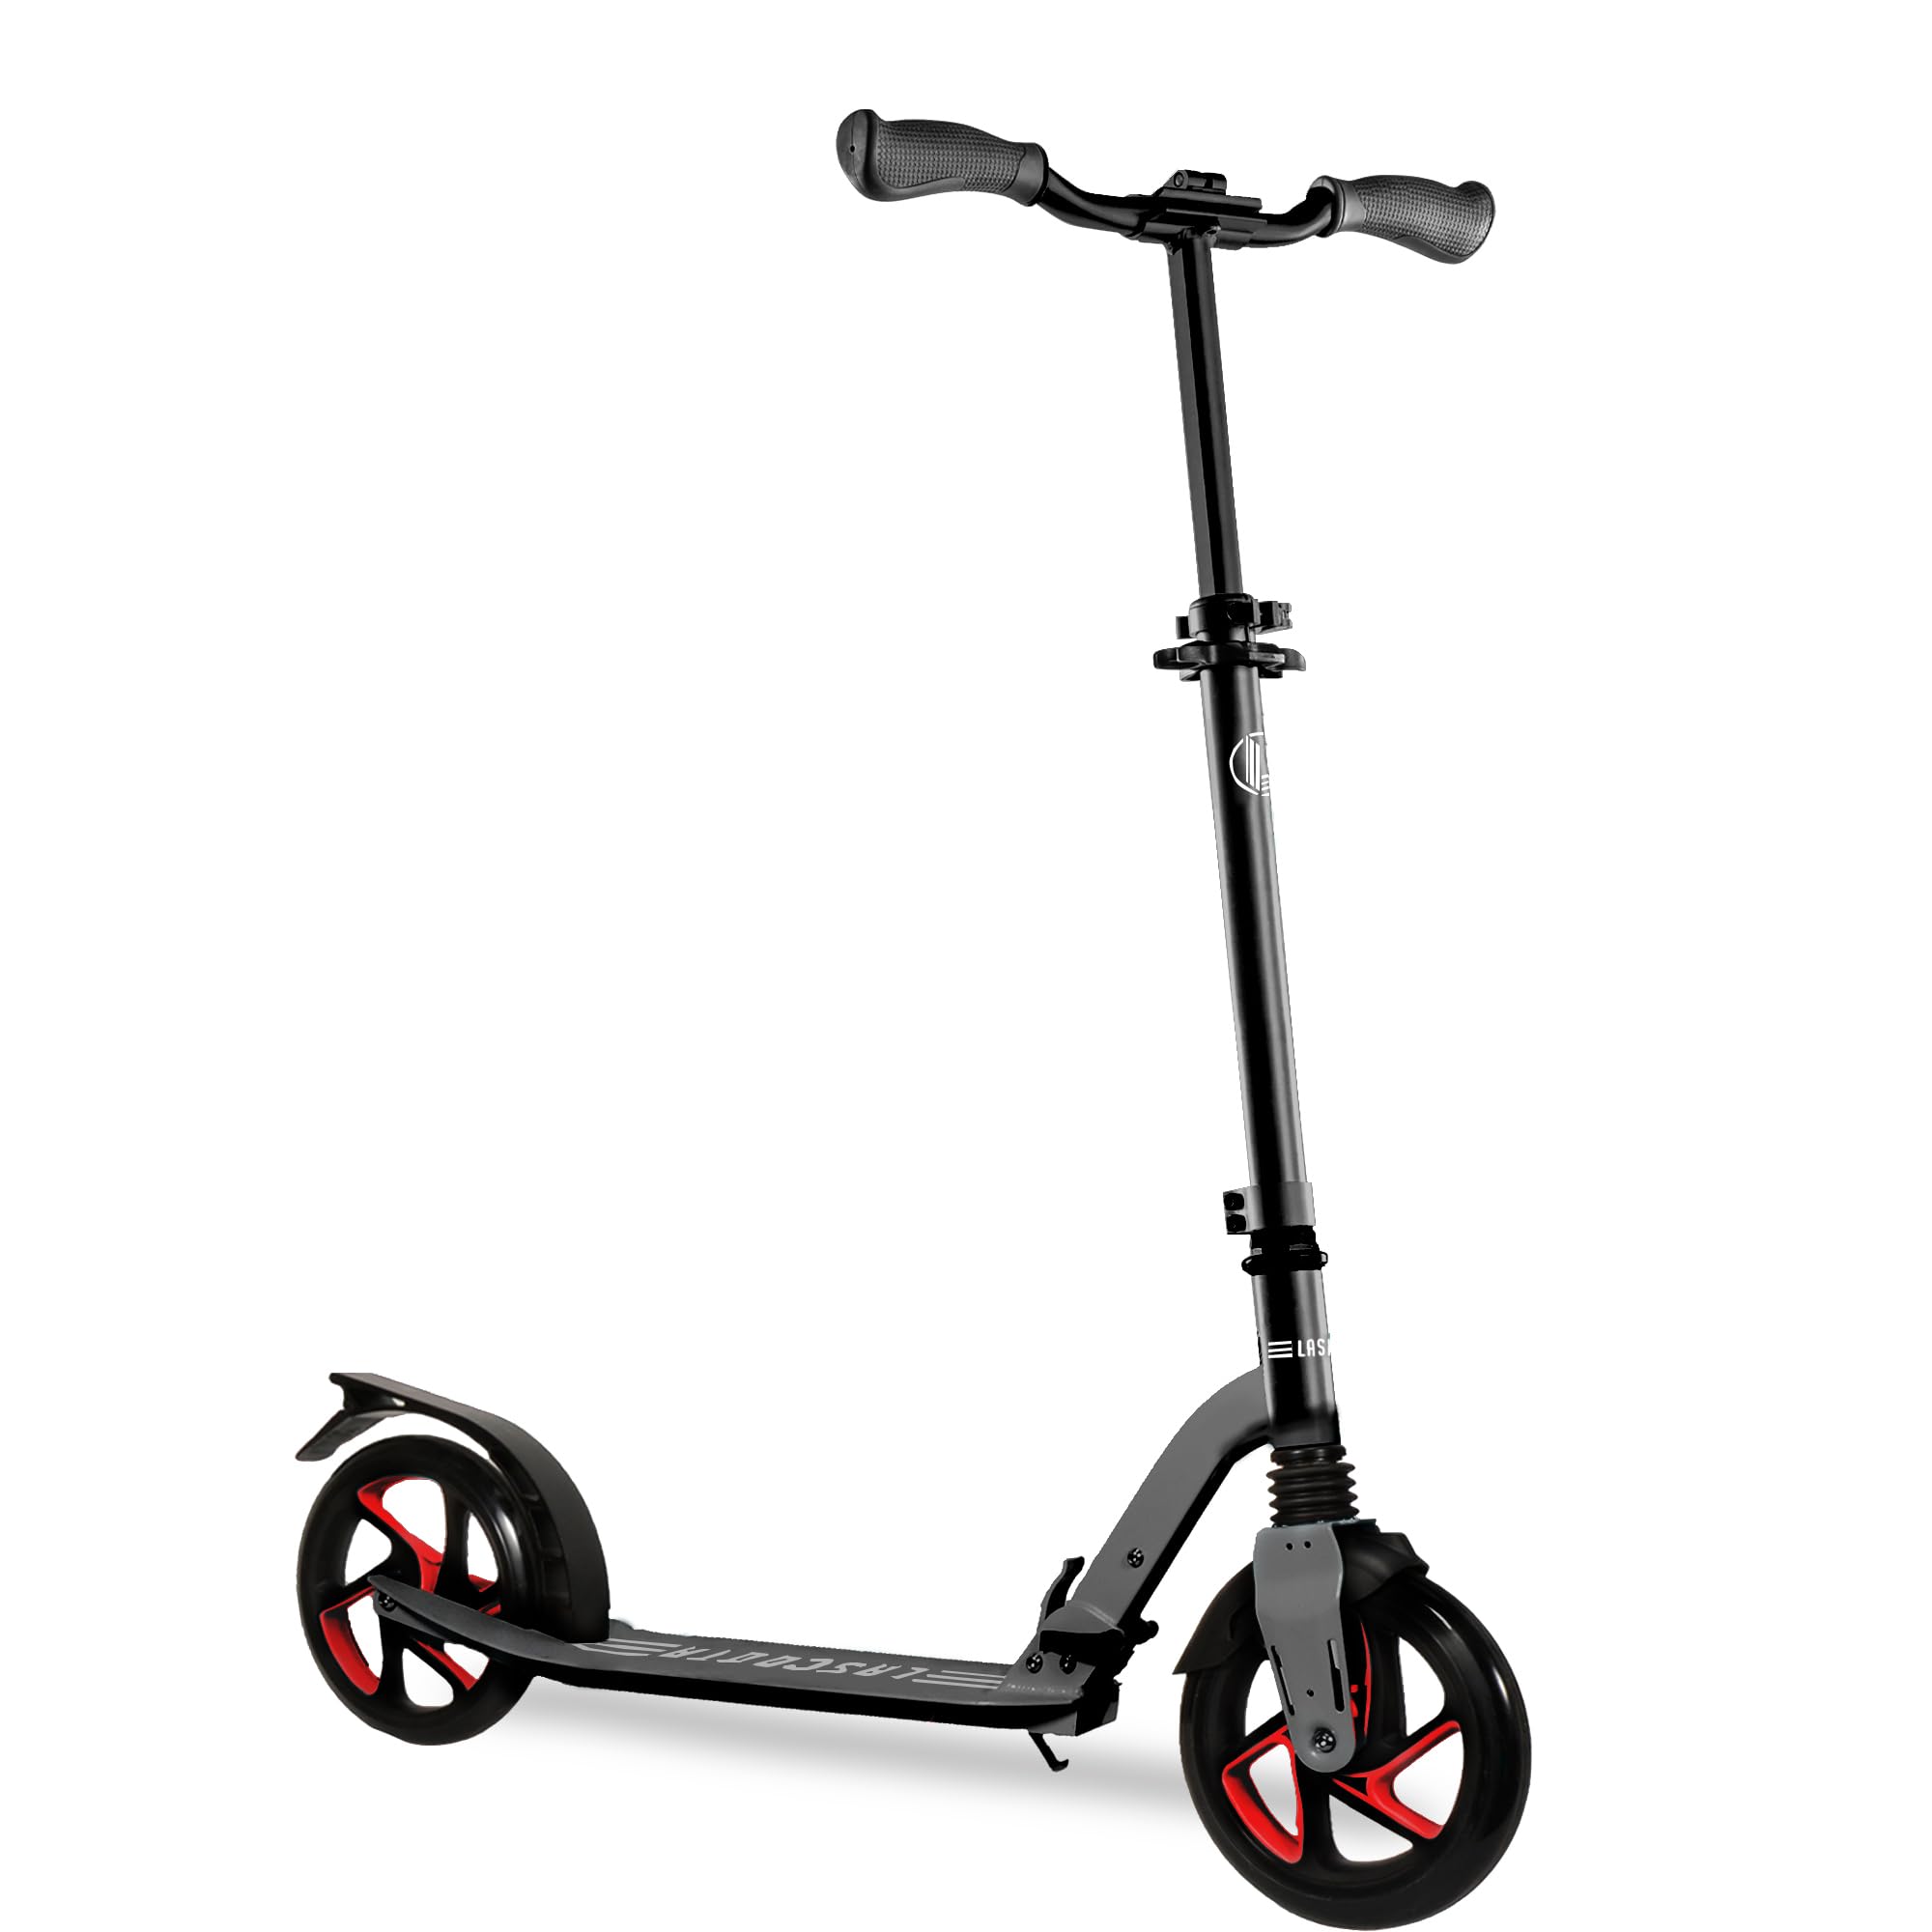 LaScoota Kick Scooter for Kids Ages 6+, Teens & Adults, Lightweight, Big Sturdy Urethane Wheels. Adjustable Handlebar, Foldable Scooter for Indoor & Outdoor, Great Gift & Toy